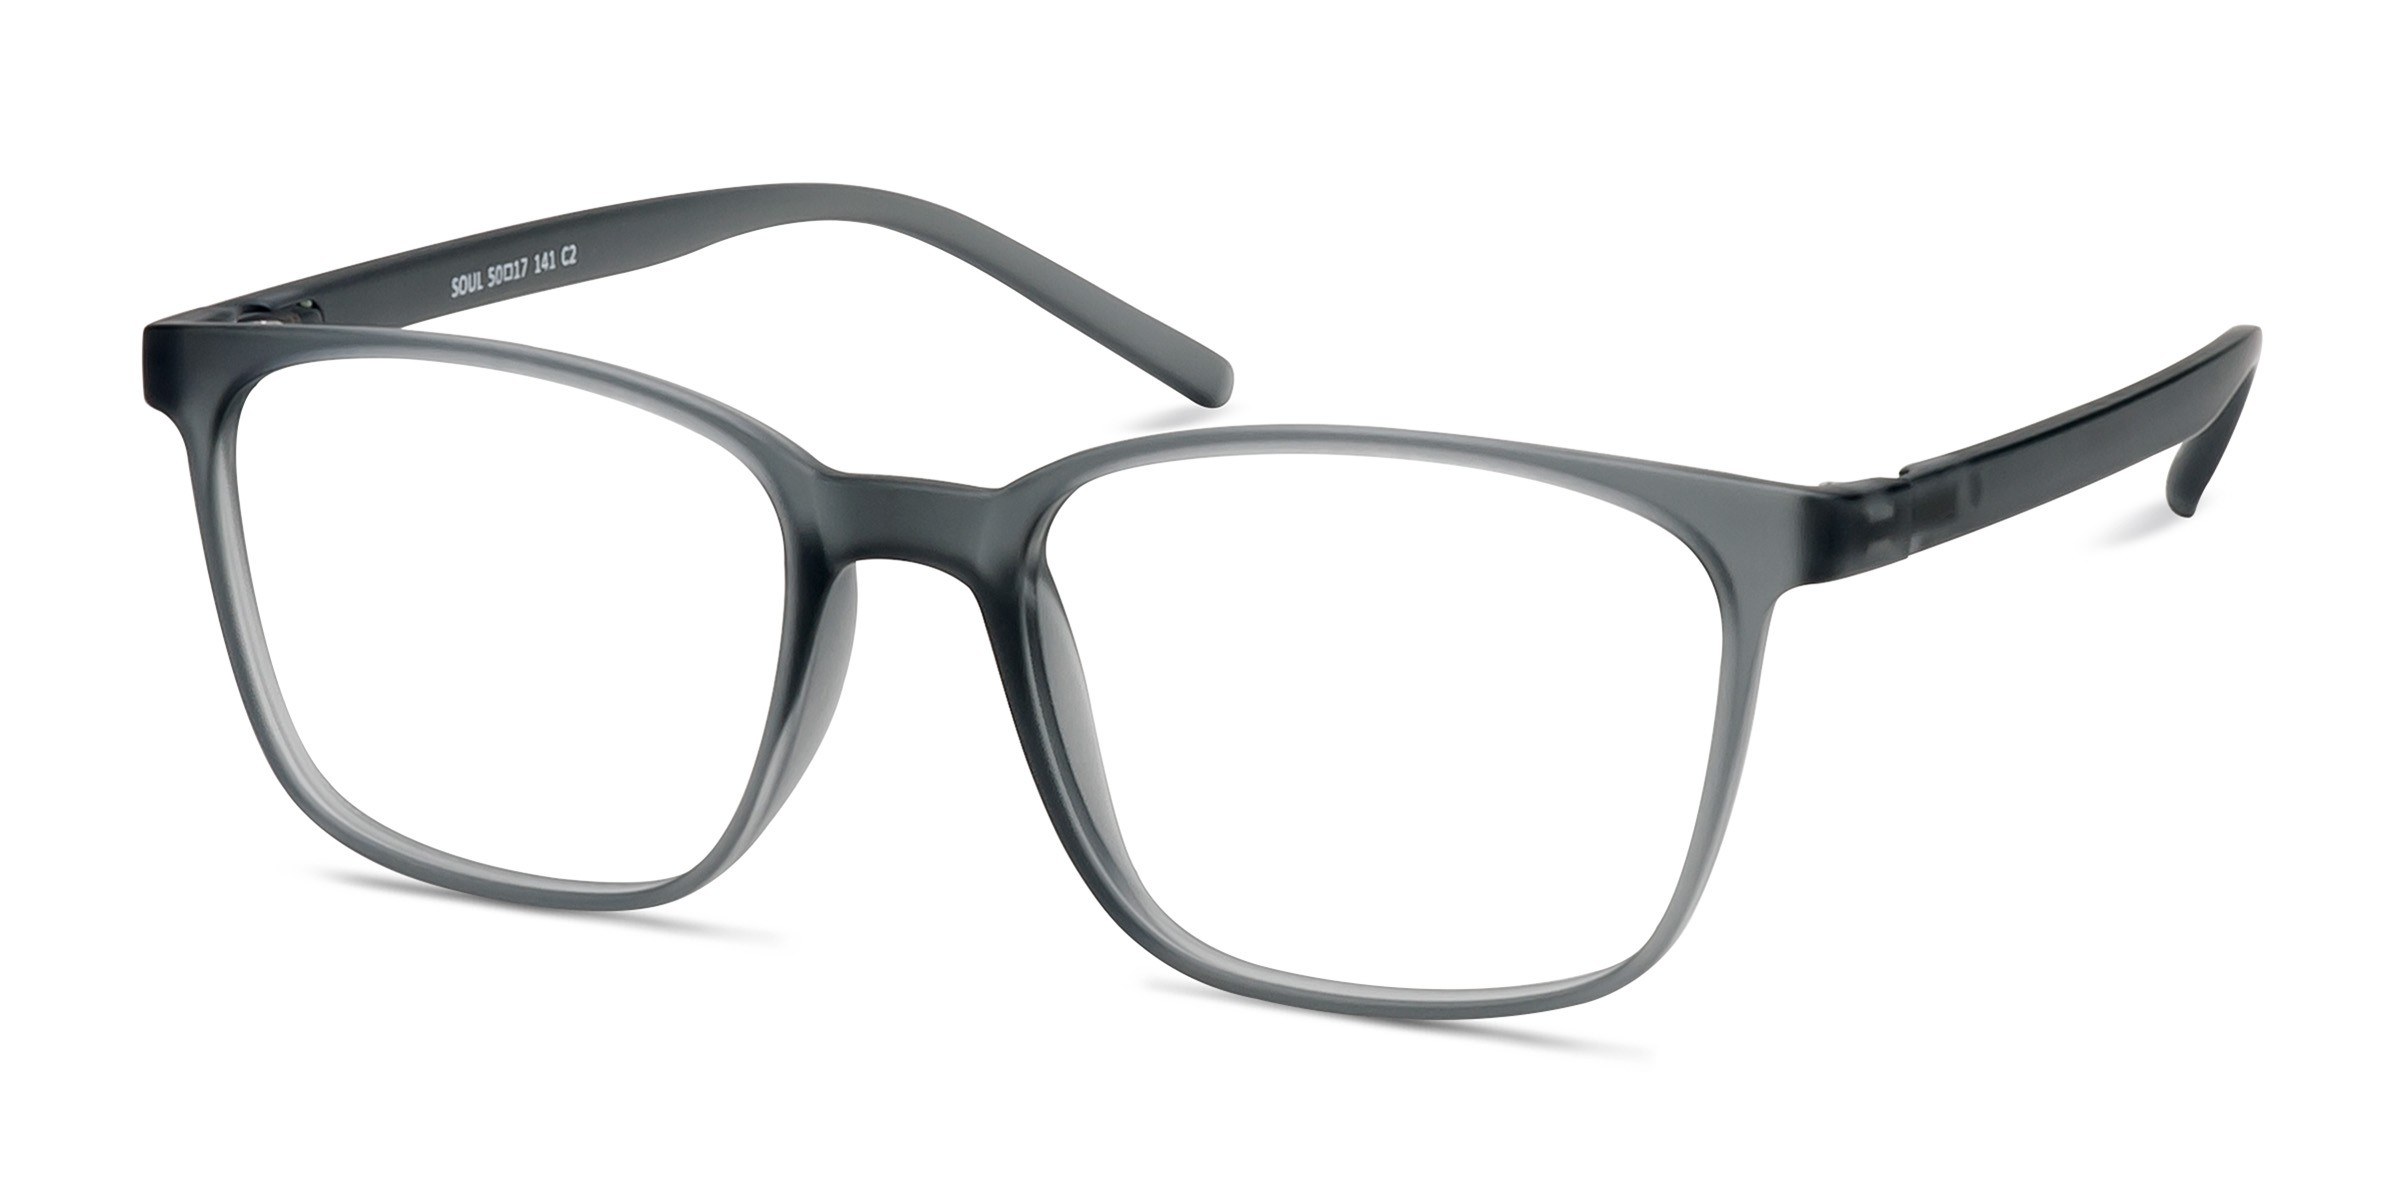 Square Glasses - Black and Colored Frames | Eyebuydirect